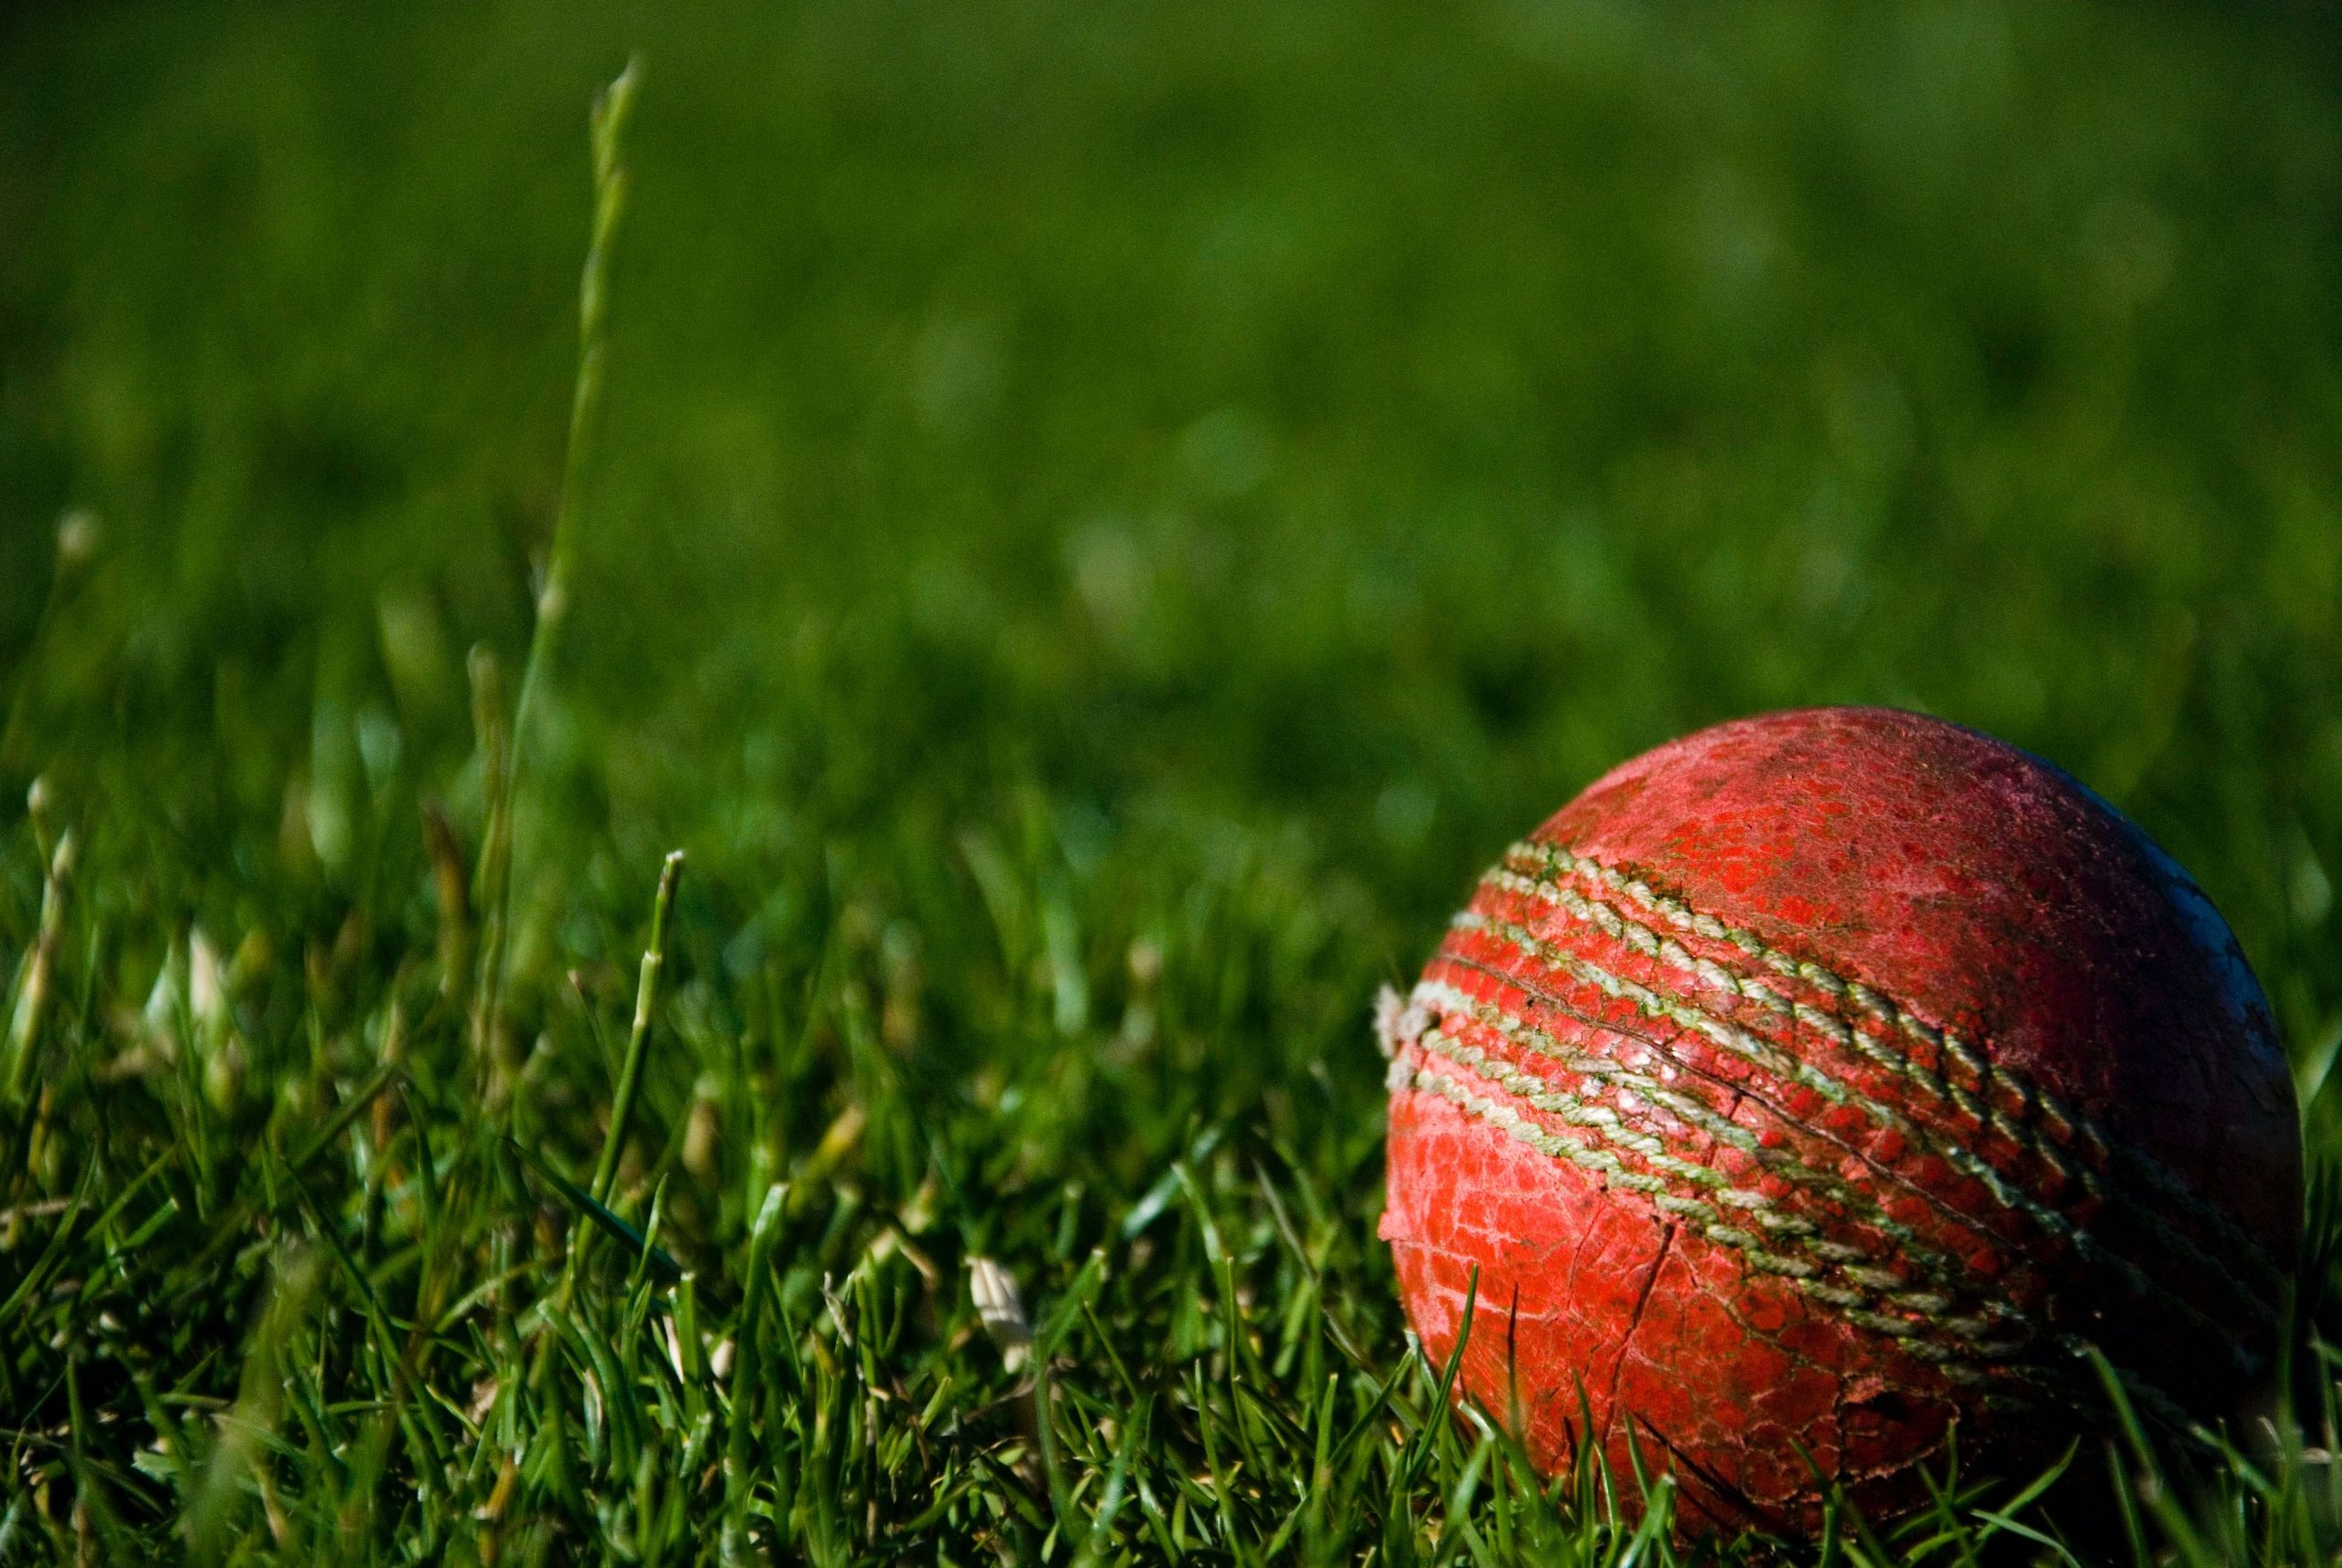 Knockout matches of the Vijay Hazare Trophy will be held in Delhi from March 7